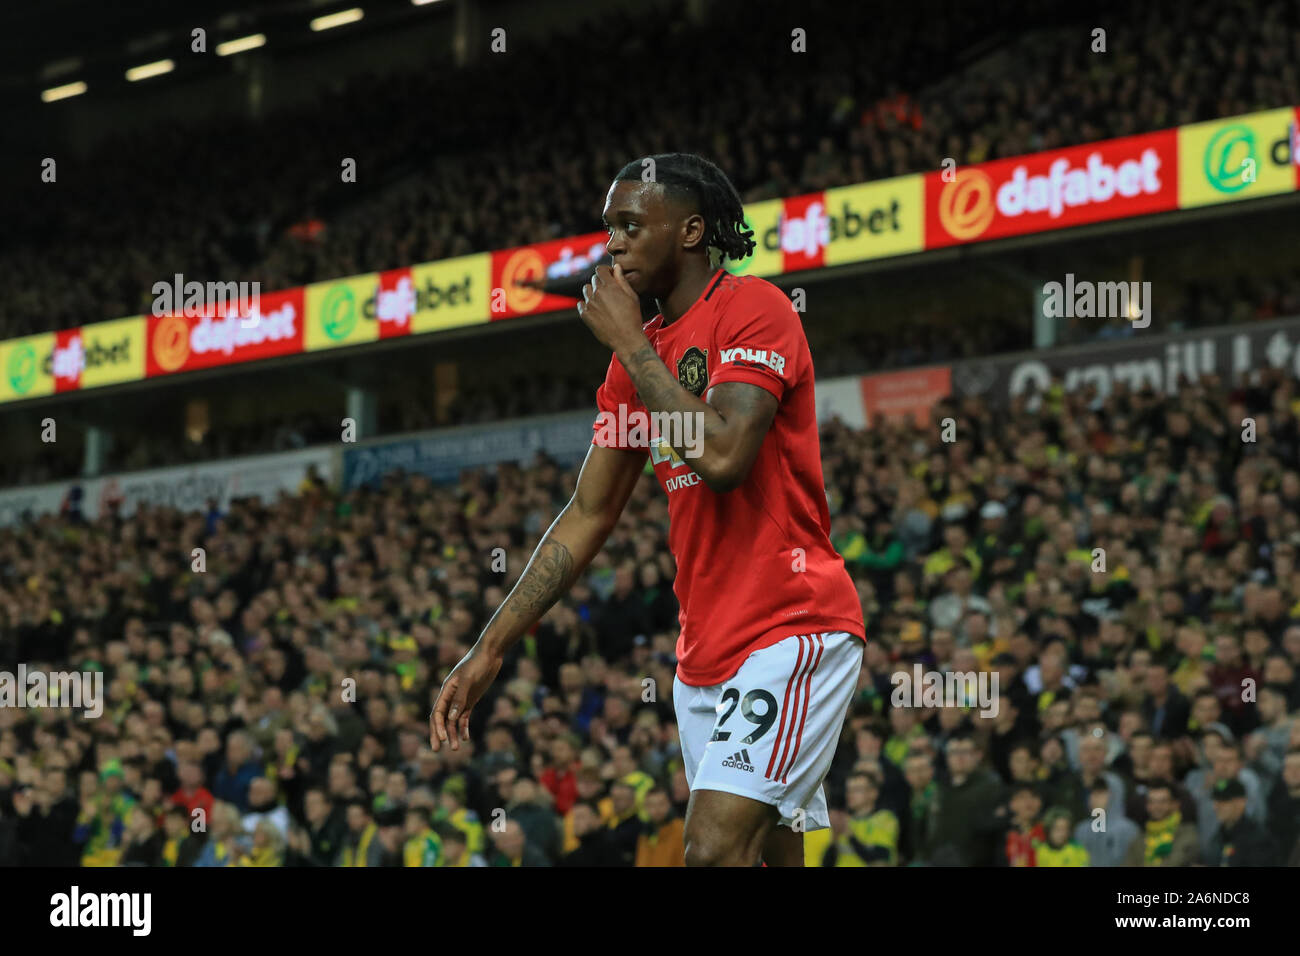 27th October 2019, Carrow Road, Norwich, England; Premier League, Norwich City v Manchester United : Aaron Wan-Bissaka (29) of Manchester United  Credit: Mark Cosgrove/News Images Stock Photo